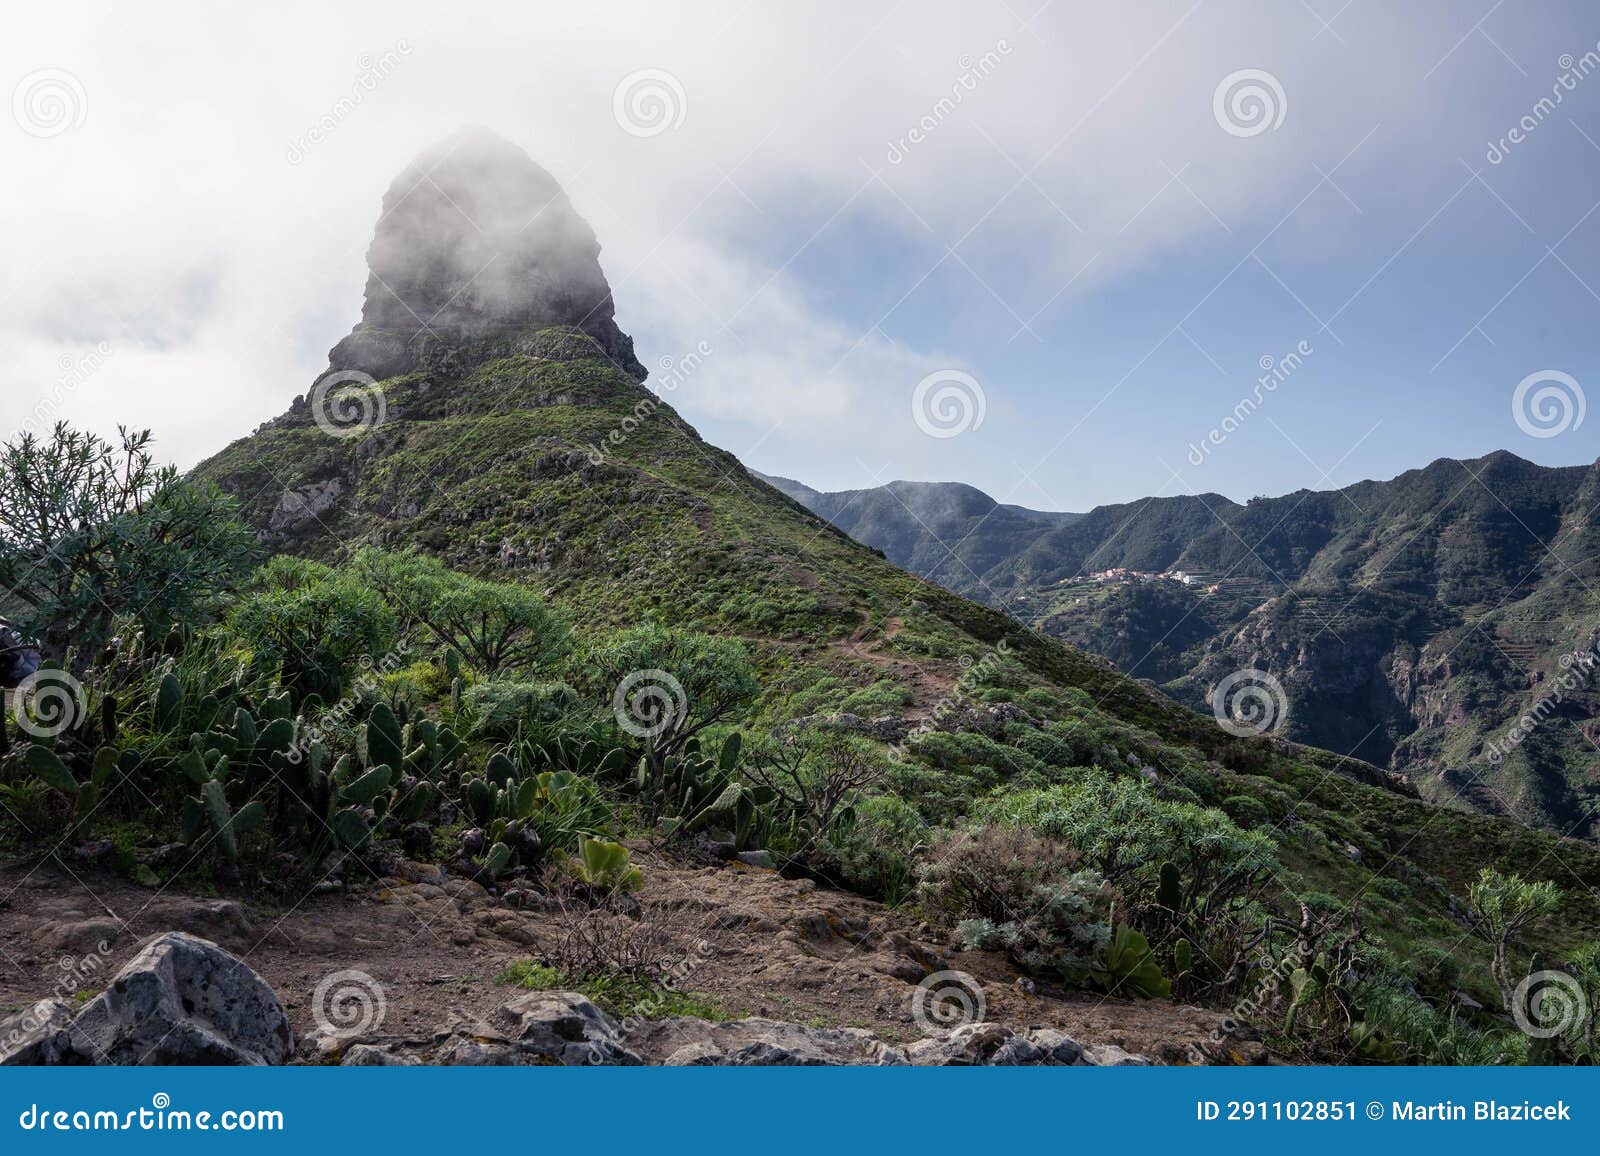 view of the taborno mountain in the clouds in national park anaga, tenerife, canary islands, spain.